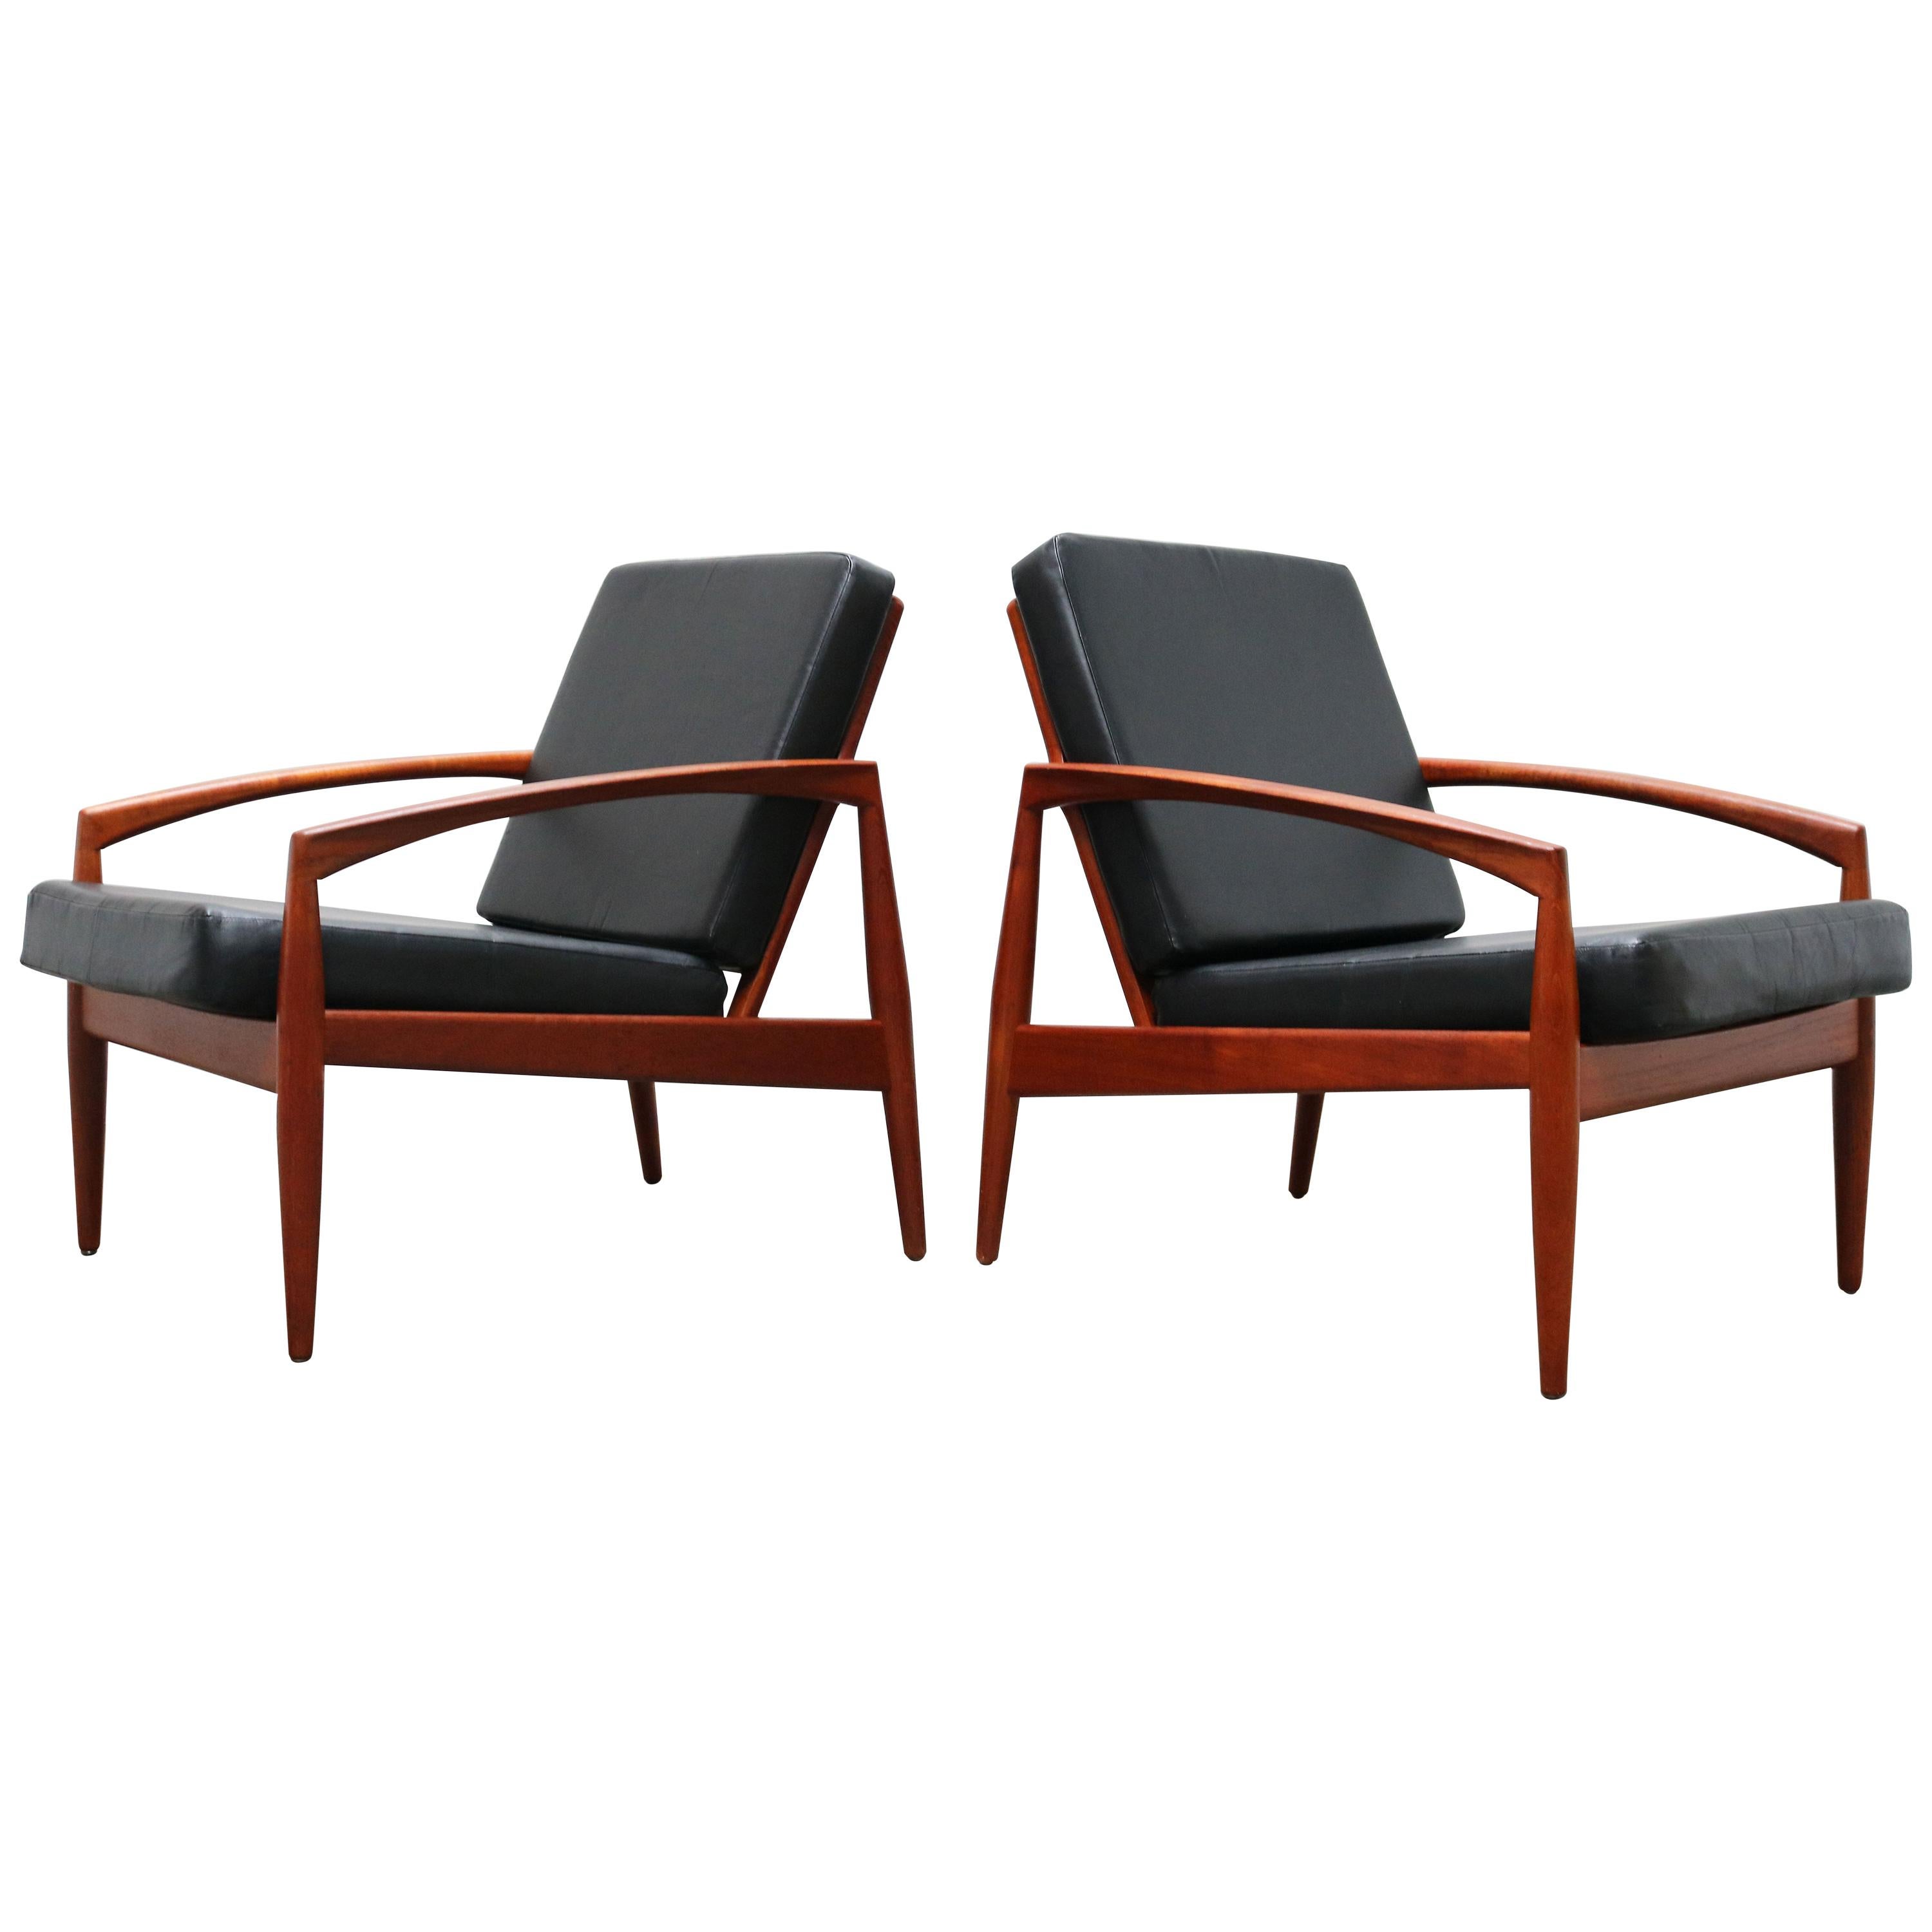 Pair of Danish Design Paper Knife Lounge Chairs by Kai Kristiansen in Teak Black For Sale